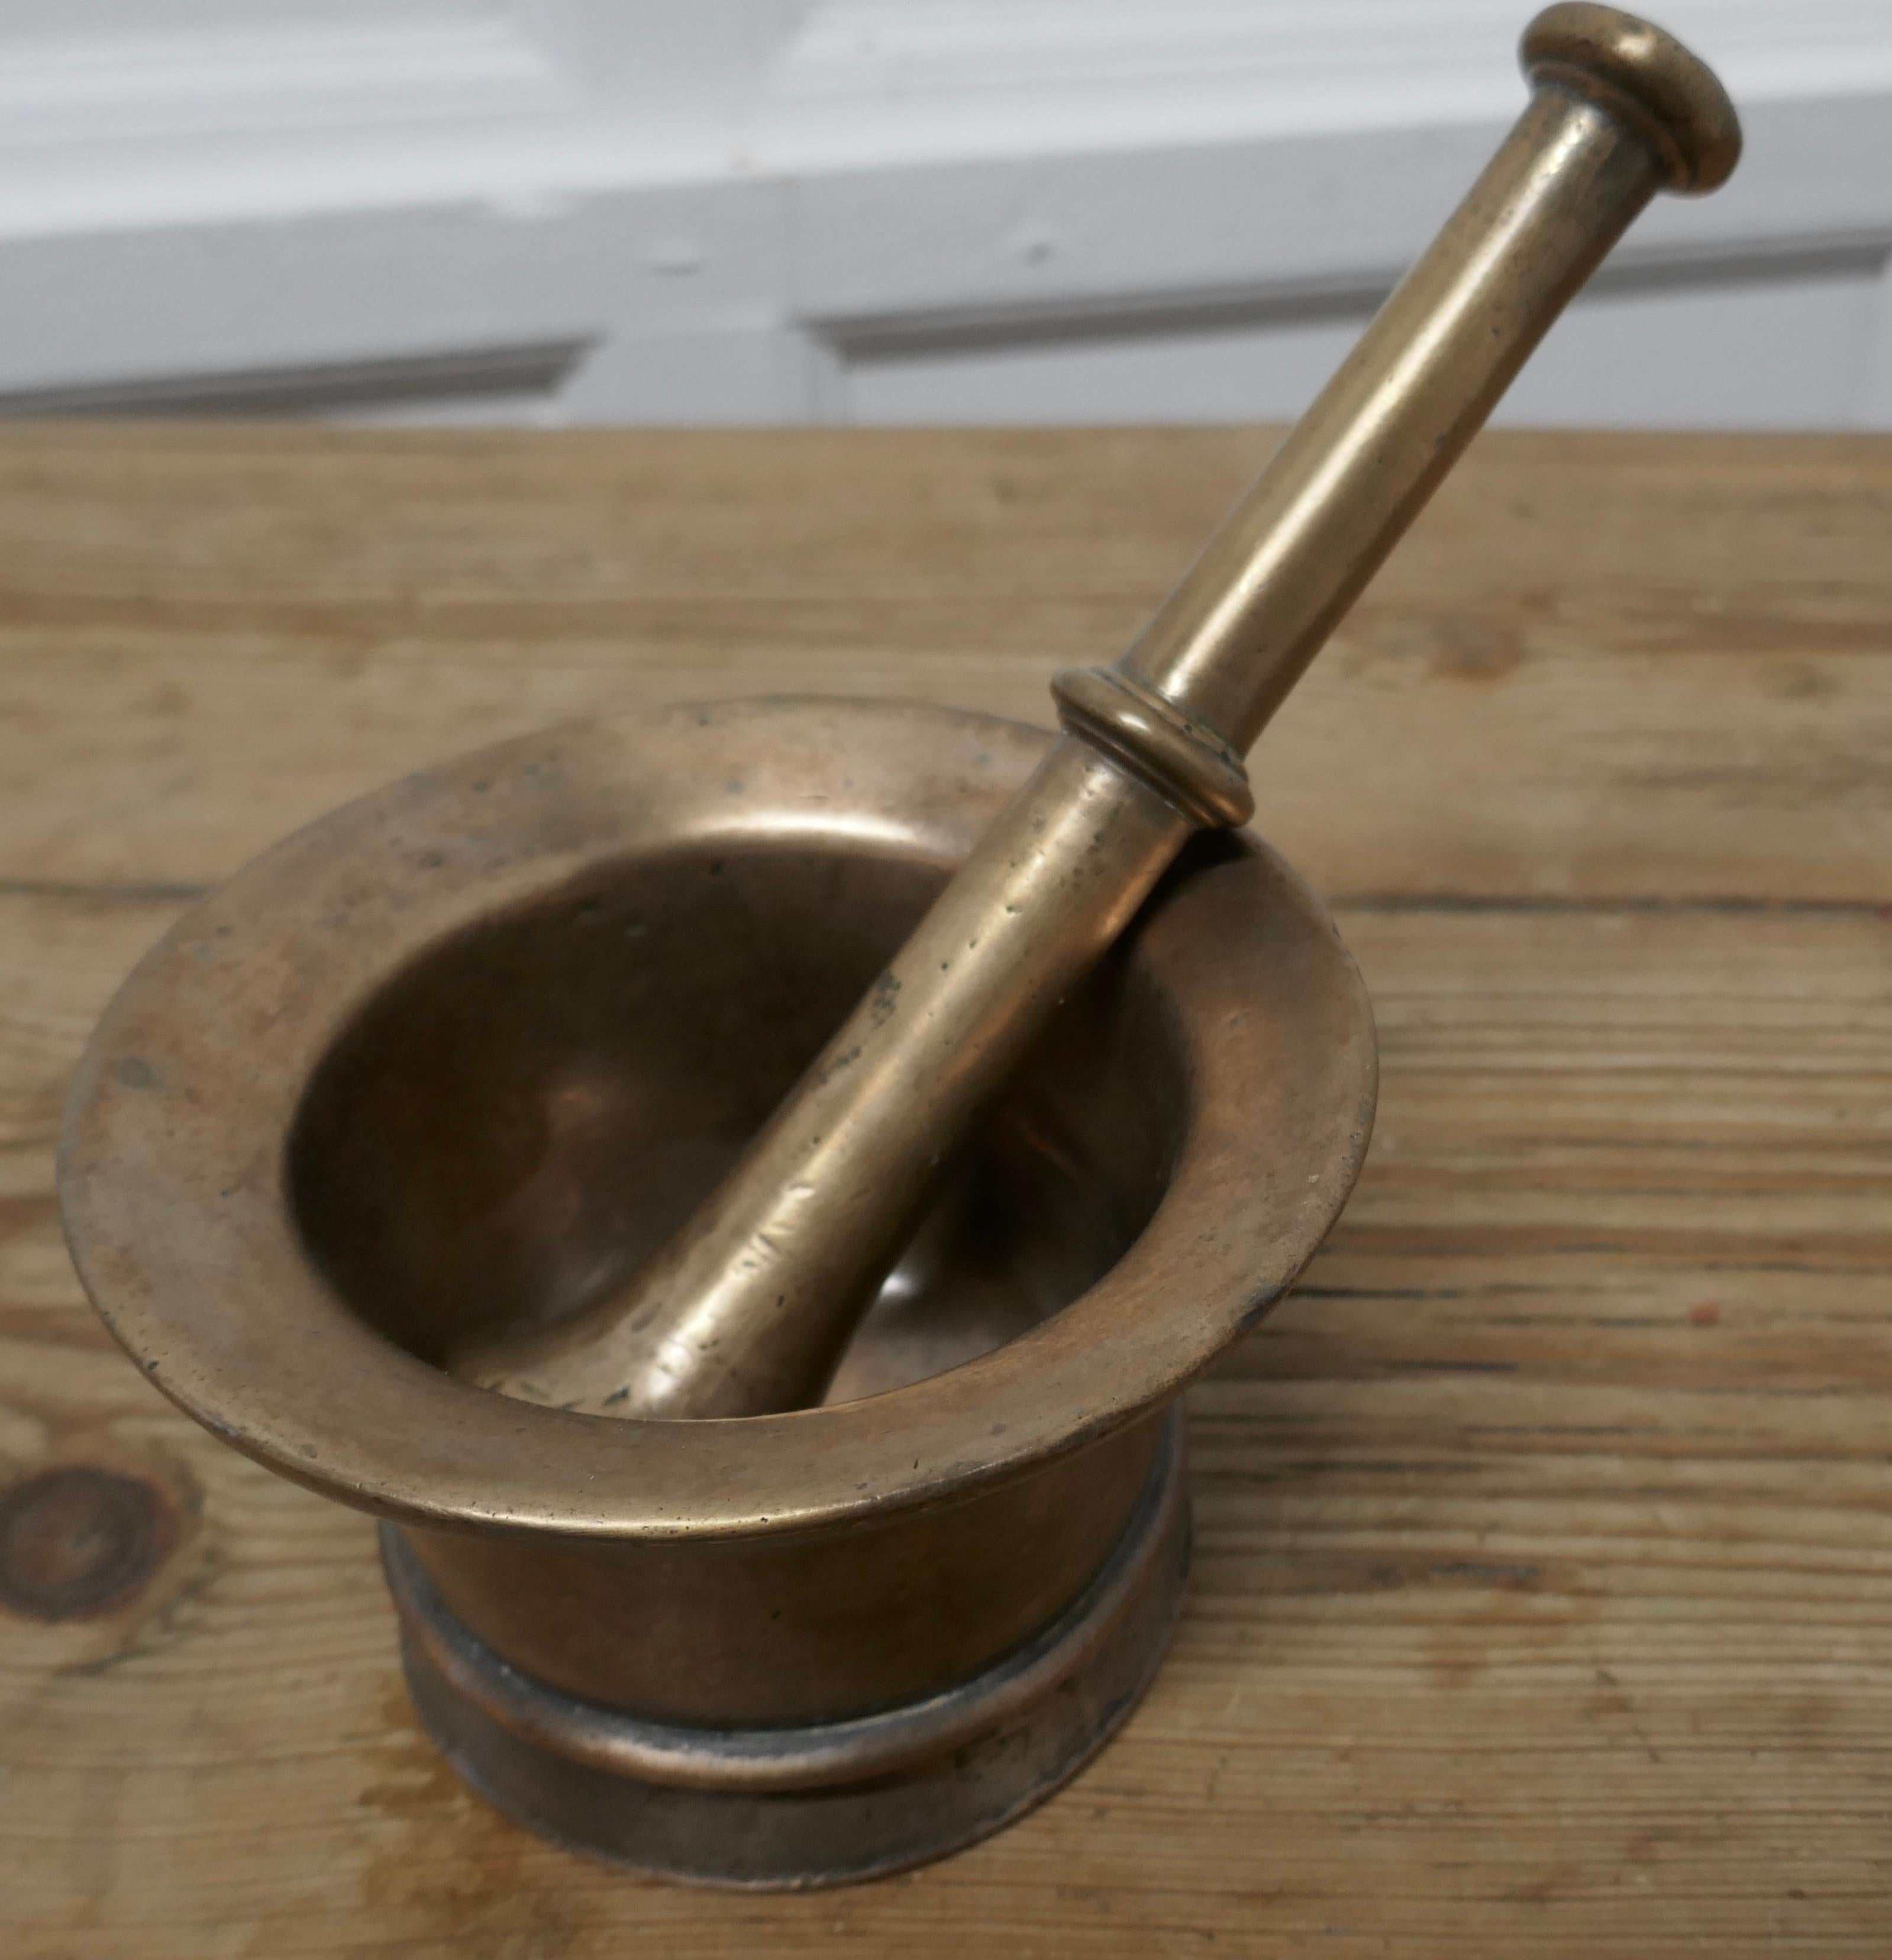 Heavy French bronze pestle and mortar 

A good pair and ready for your kitchen
The mortar is clean inside, this is a very heavy pair, in good used condition, a charming culinary piece
The mortar is 4” high and 5.5” in diameter, the pestle is 9”